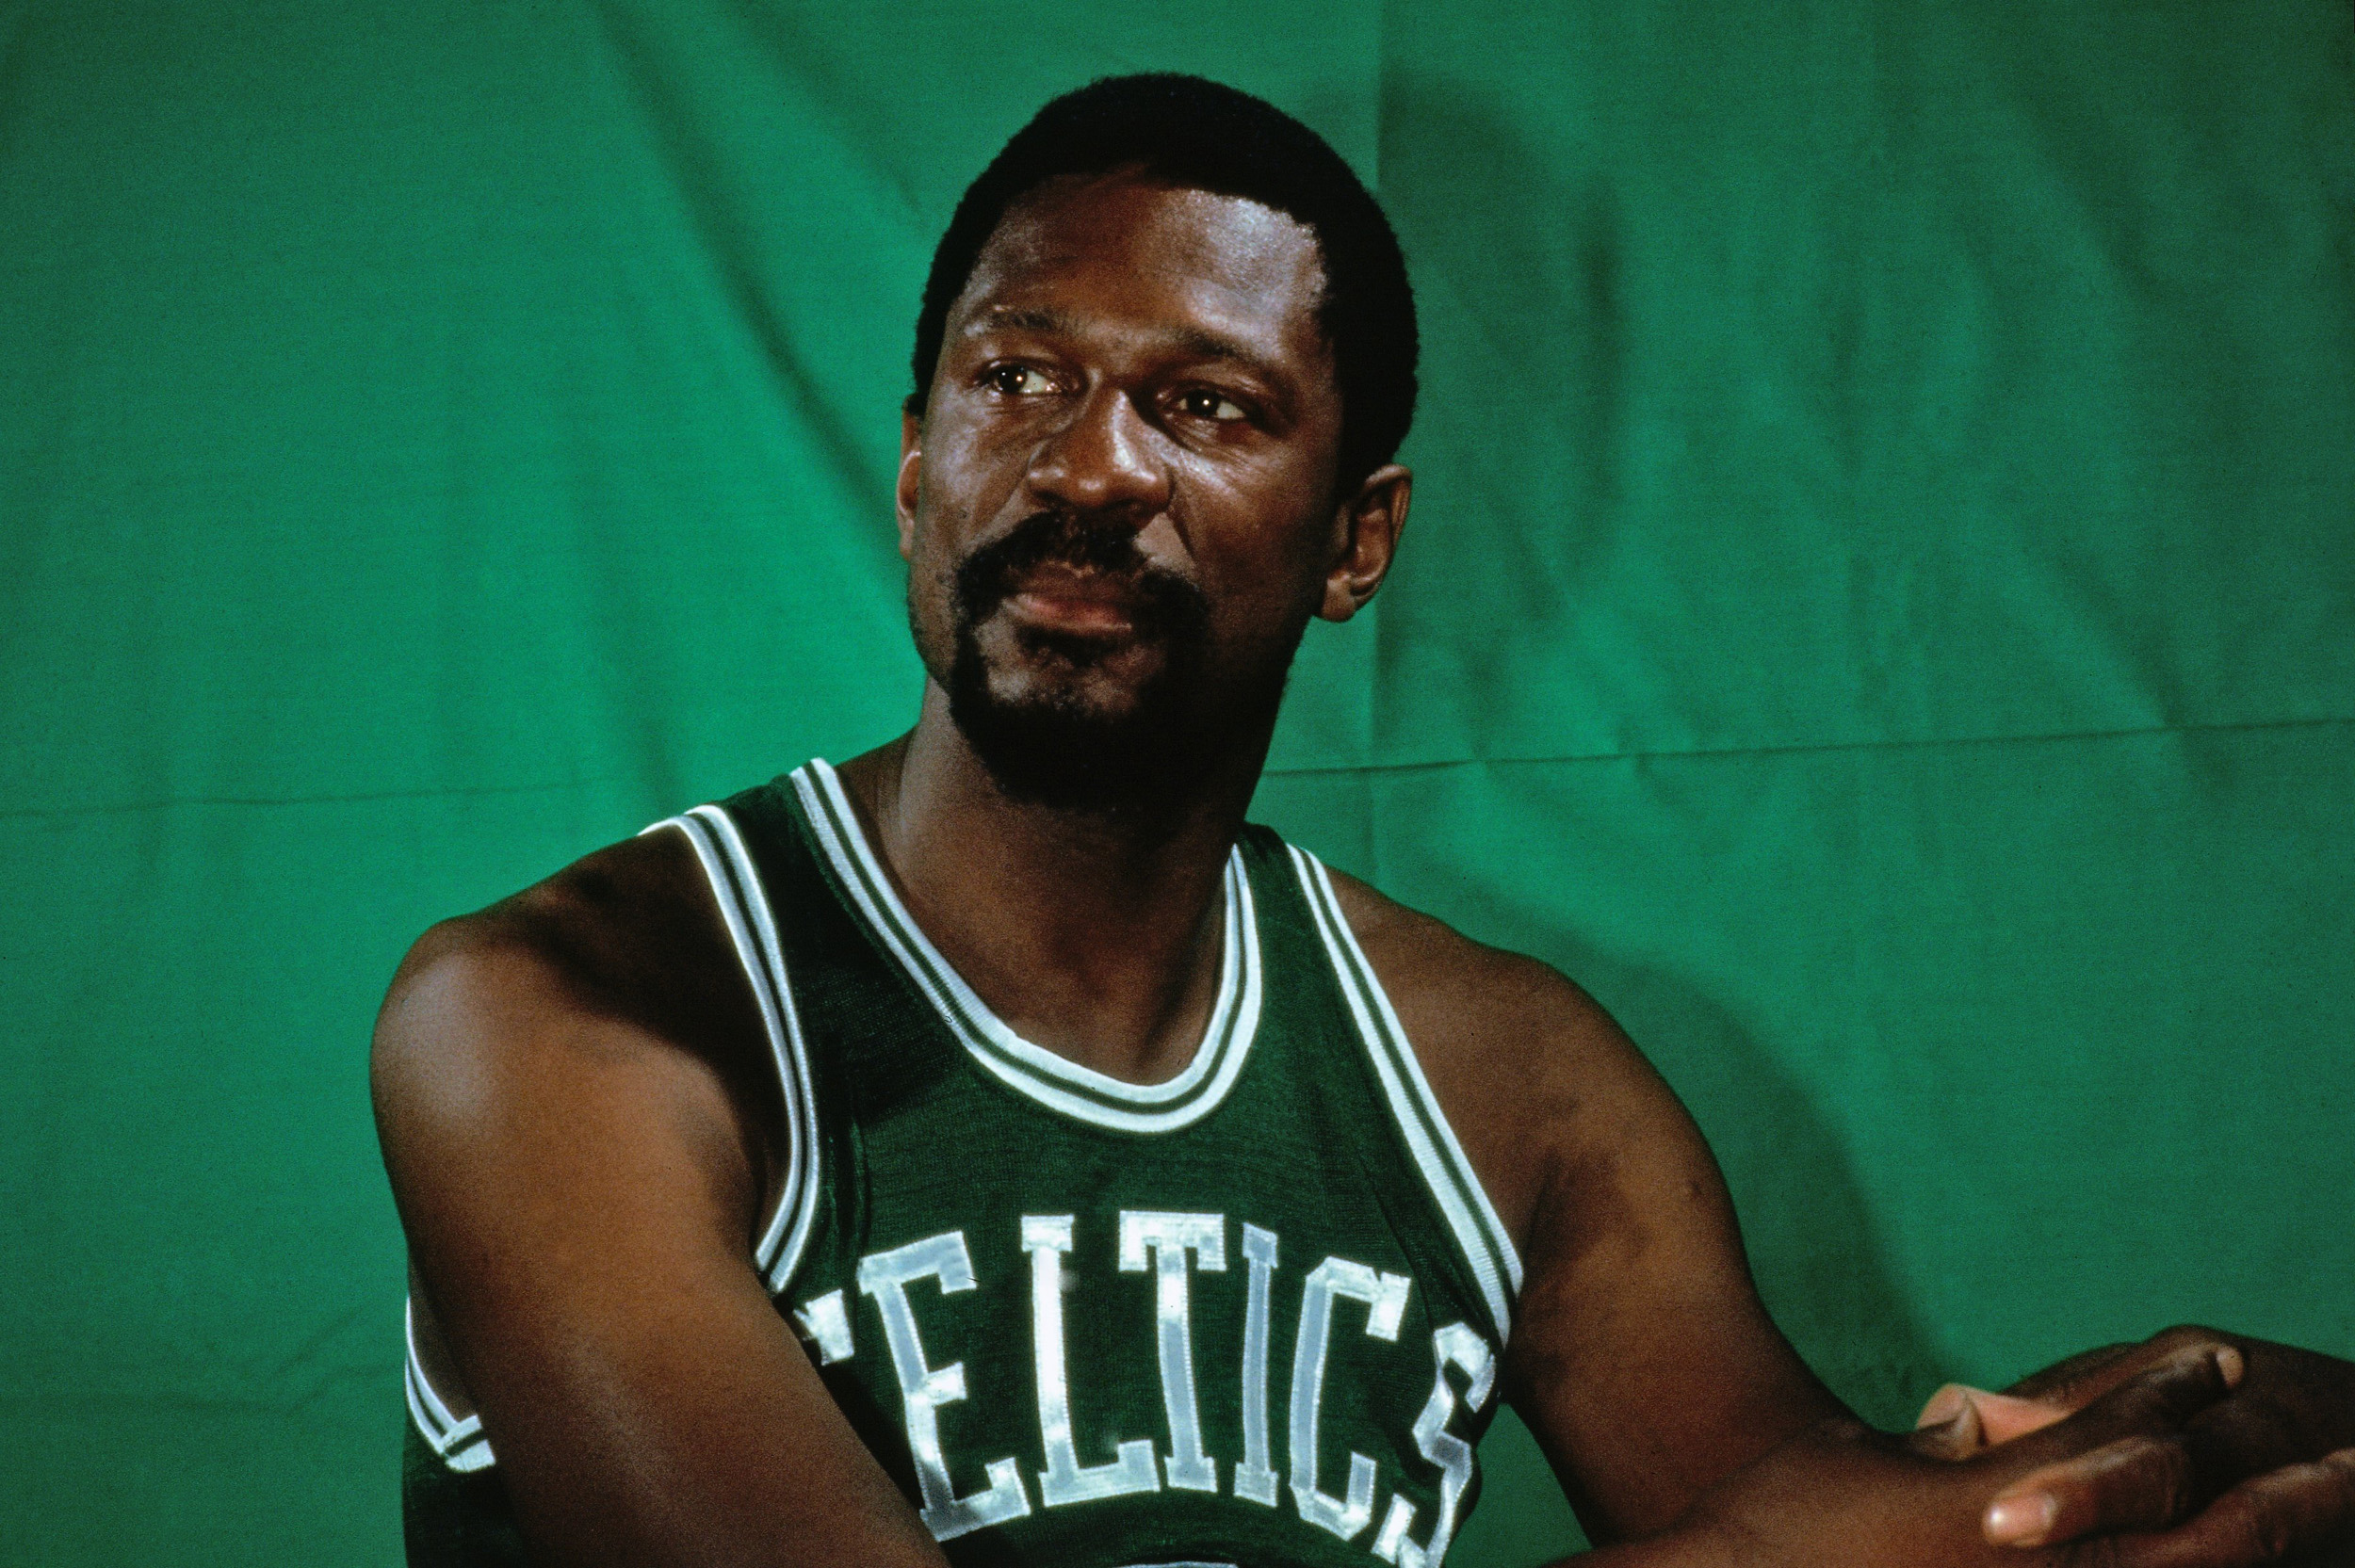 Bill Russell, NBA Star And Civil Rights Pioneer, Dies At 88